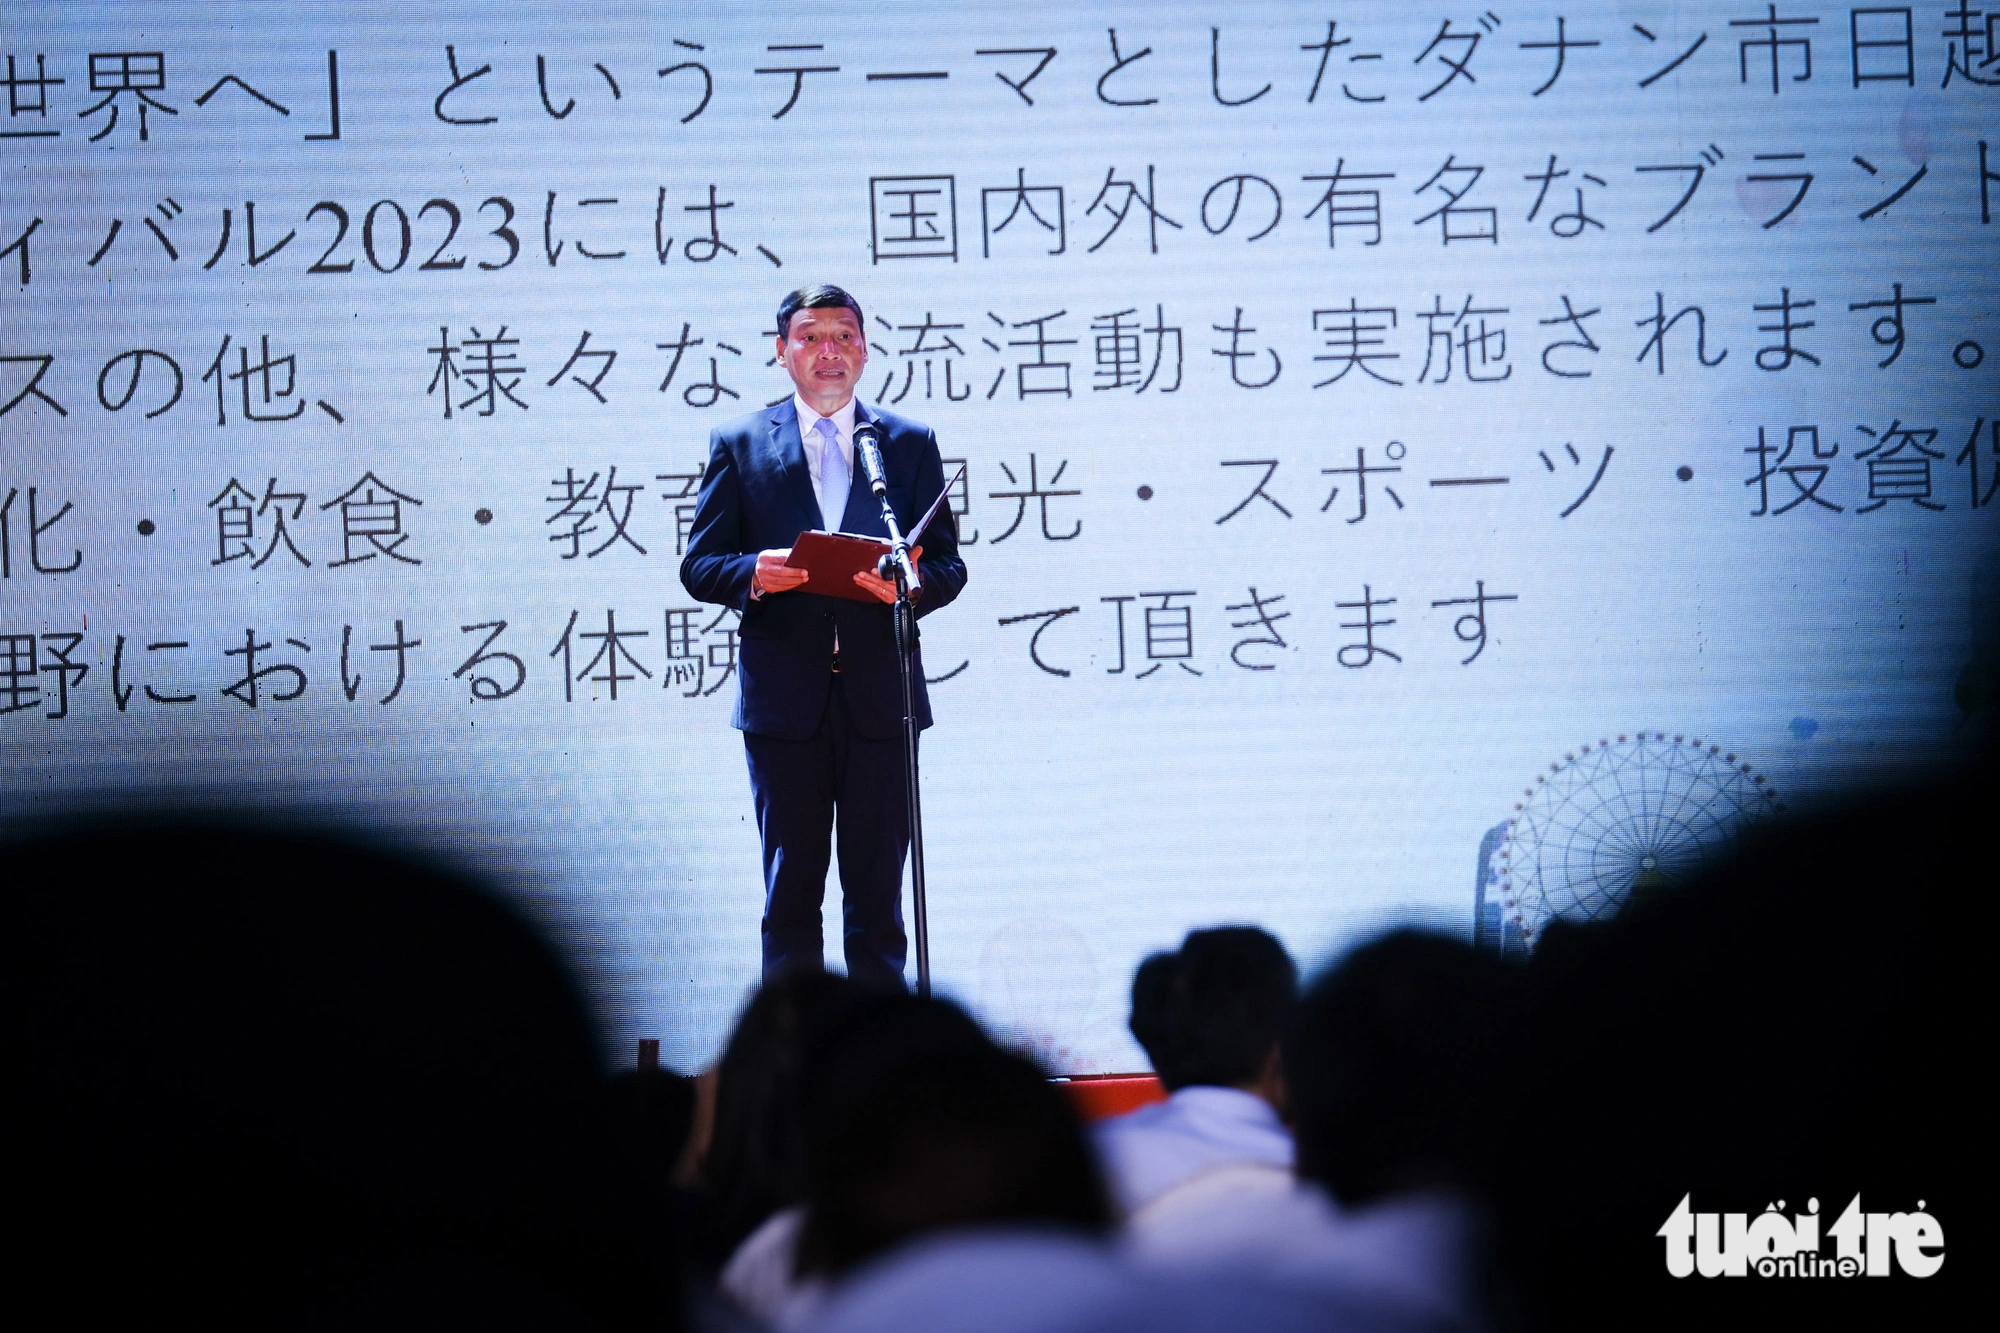 Vice chairman of the Da Nang People’s Committee Ho Ky Minh speaks at the opening ceremony of the Vietnam-Japan Festival on July 13, 2023. Photo: Tan Luc / Tuoi Tre